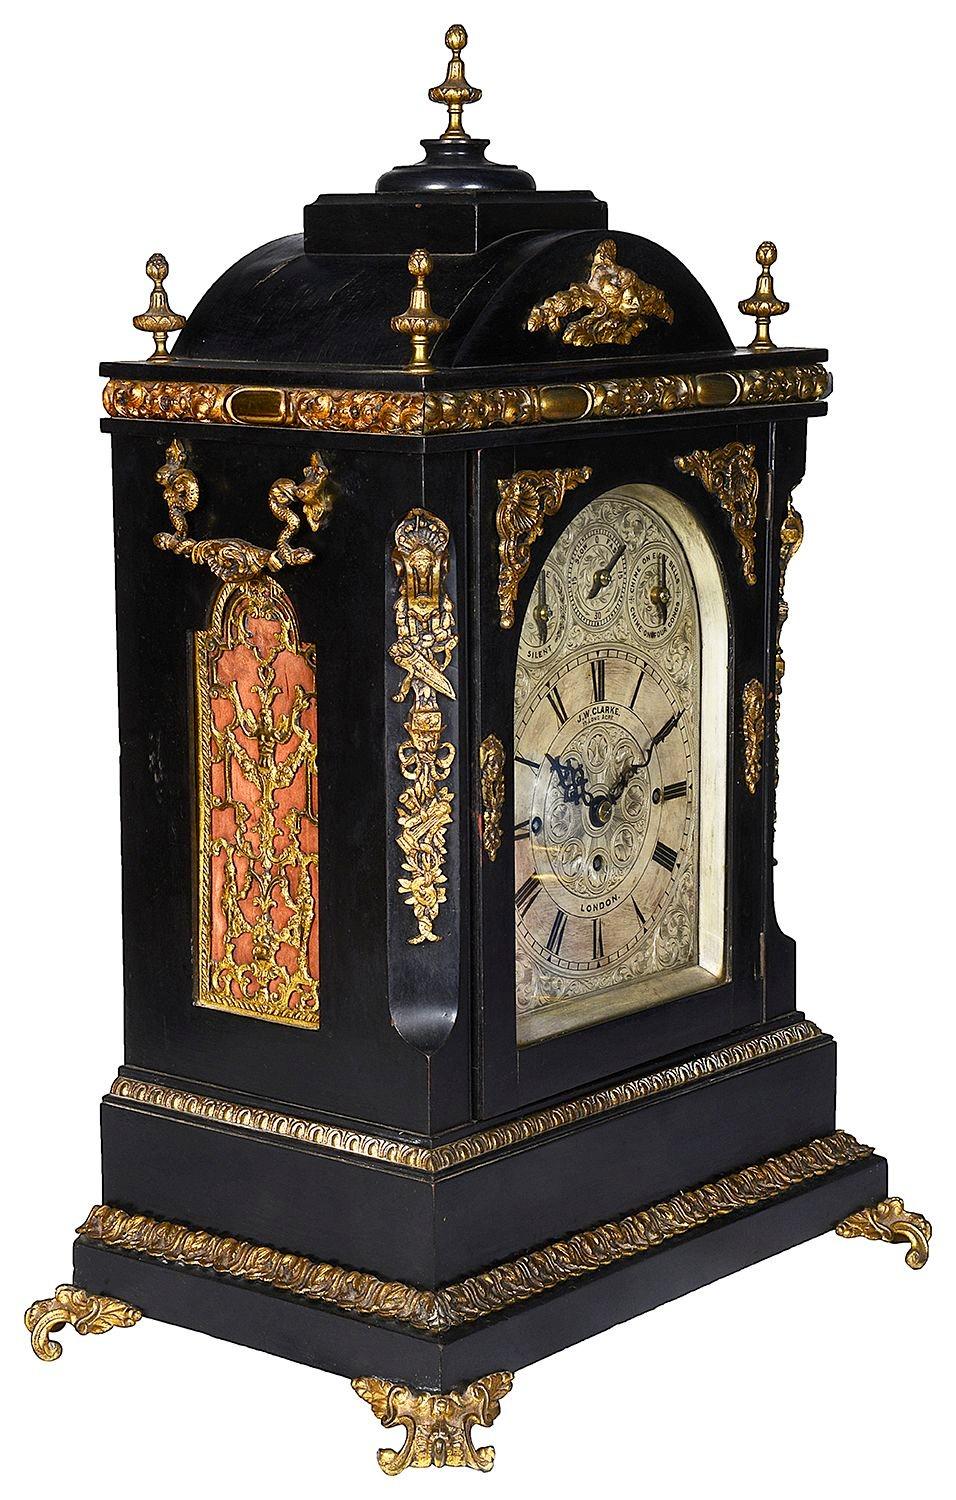 A very good quality late 19th Century ebonised Victorian silvered dial mantel clock, with Westminster chime on 8 bells or gong. Having a strike / silent dial, an eight day duration movement, striking on every quarter hour.
The ebonised case with